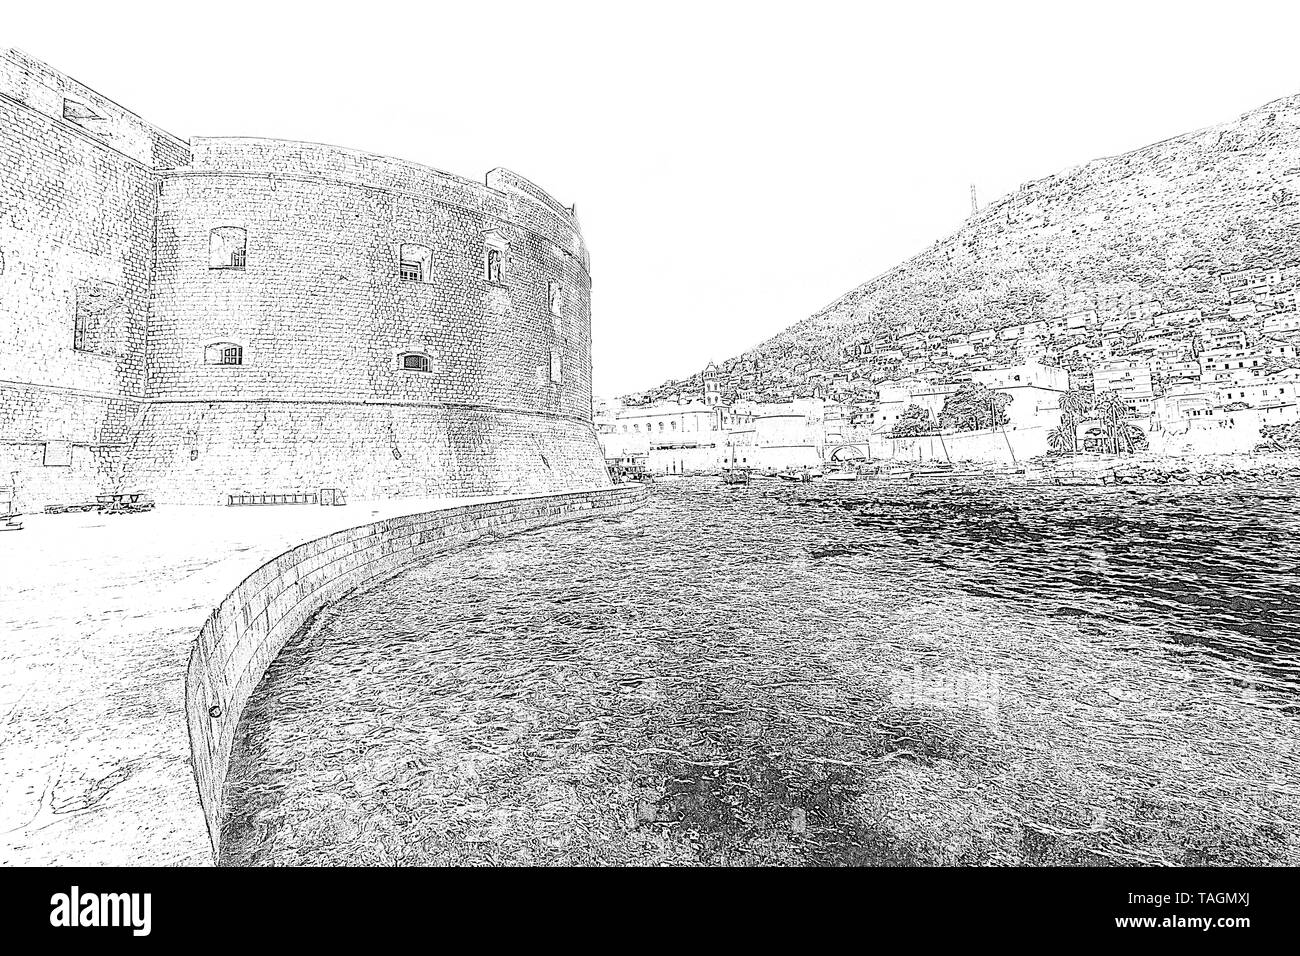 St. John fort in the city of Dubrovnik, Croatia. Processed with with pencil effect. Stock Photo